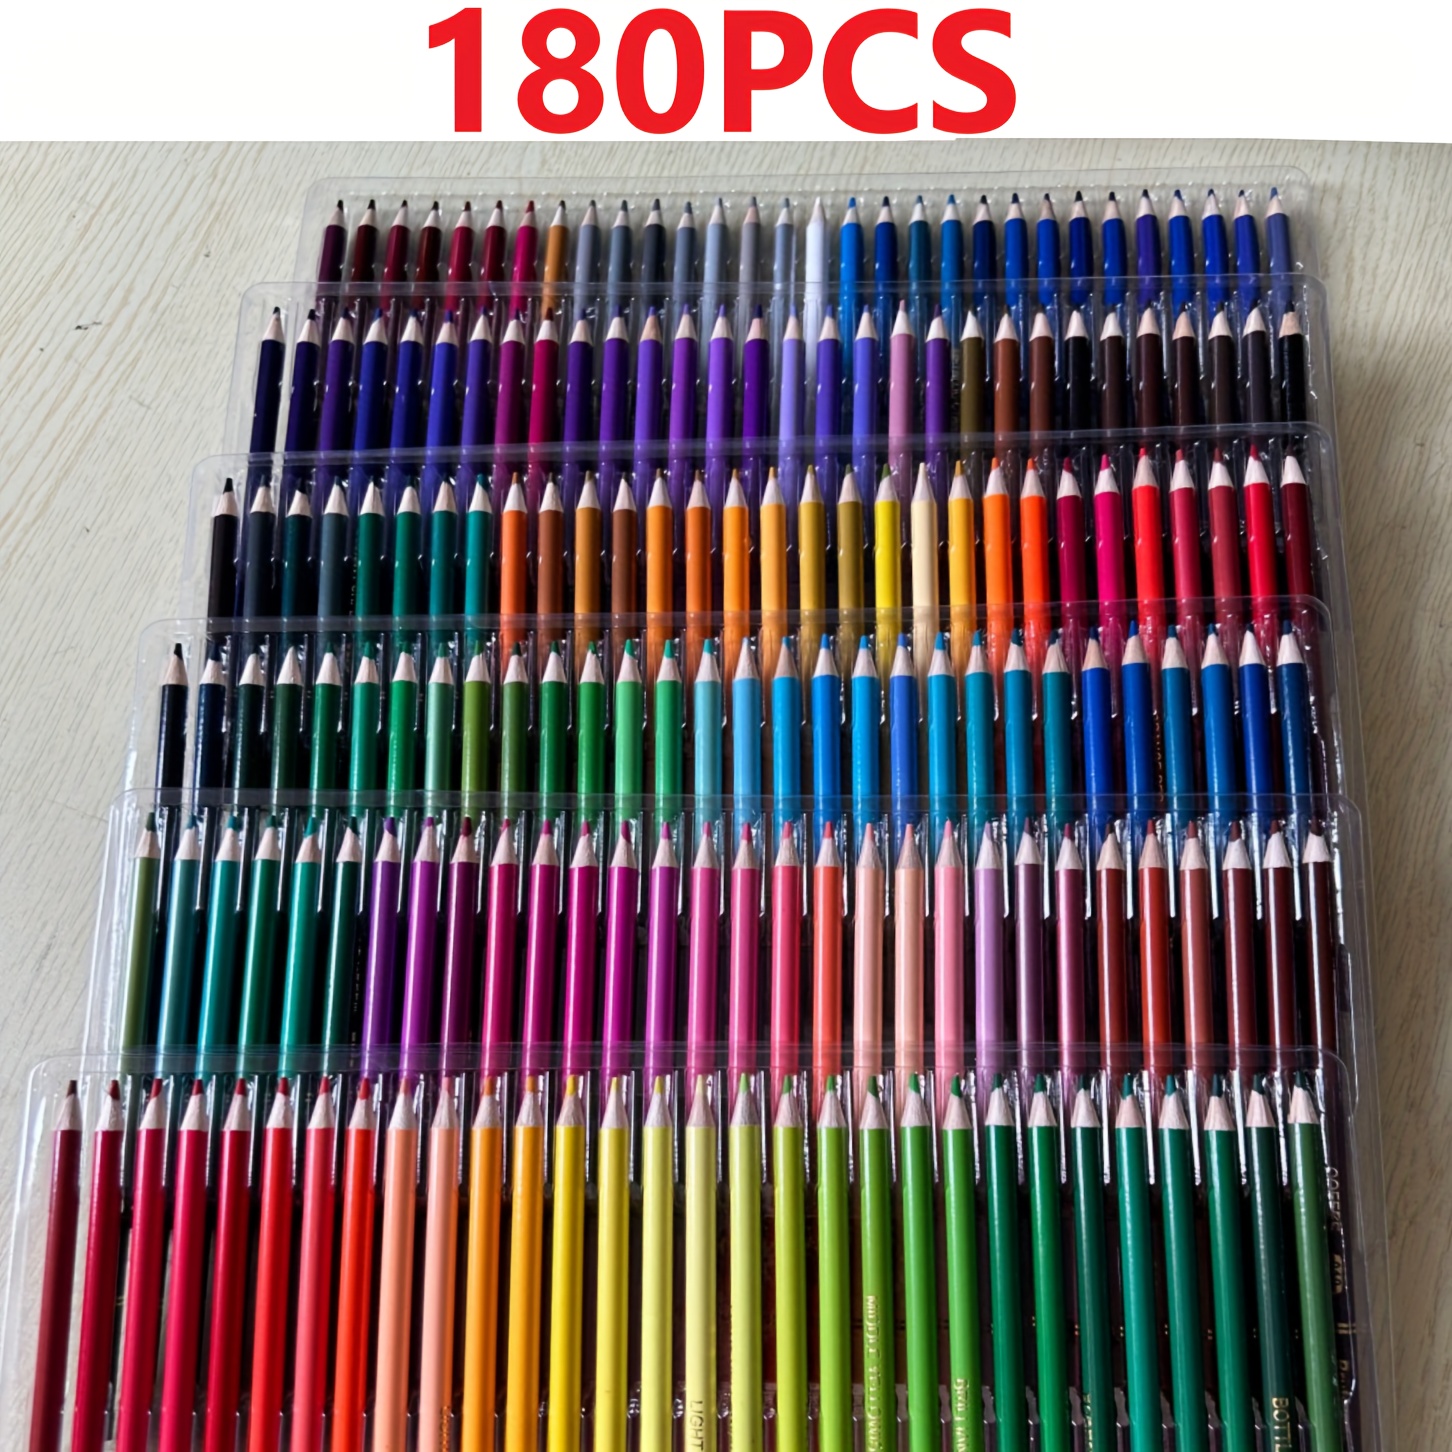 Taiyuyue Oil Based Colored Pencils 120 Colors Professional Artist Beginner  Student Coloring Blending, Layering Drawing Supplies - Wooden Lead Pencils  - AliExpress